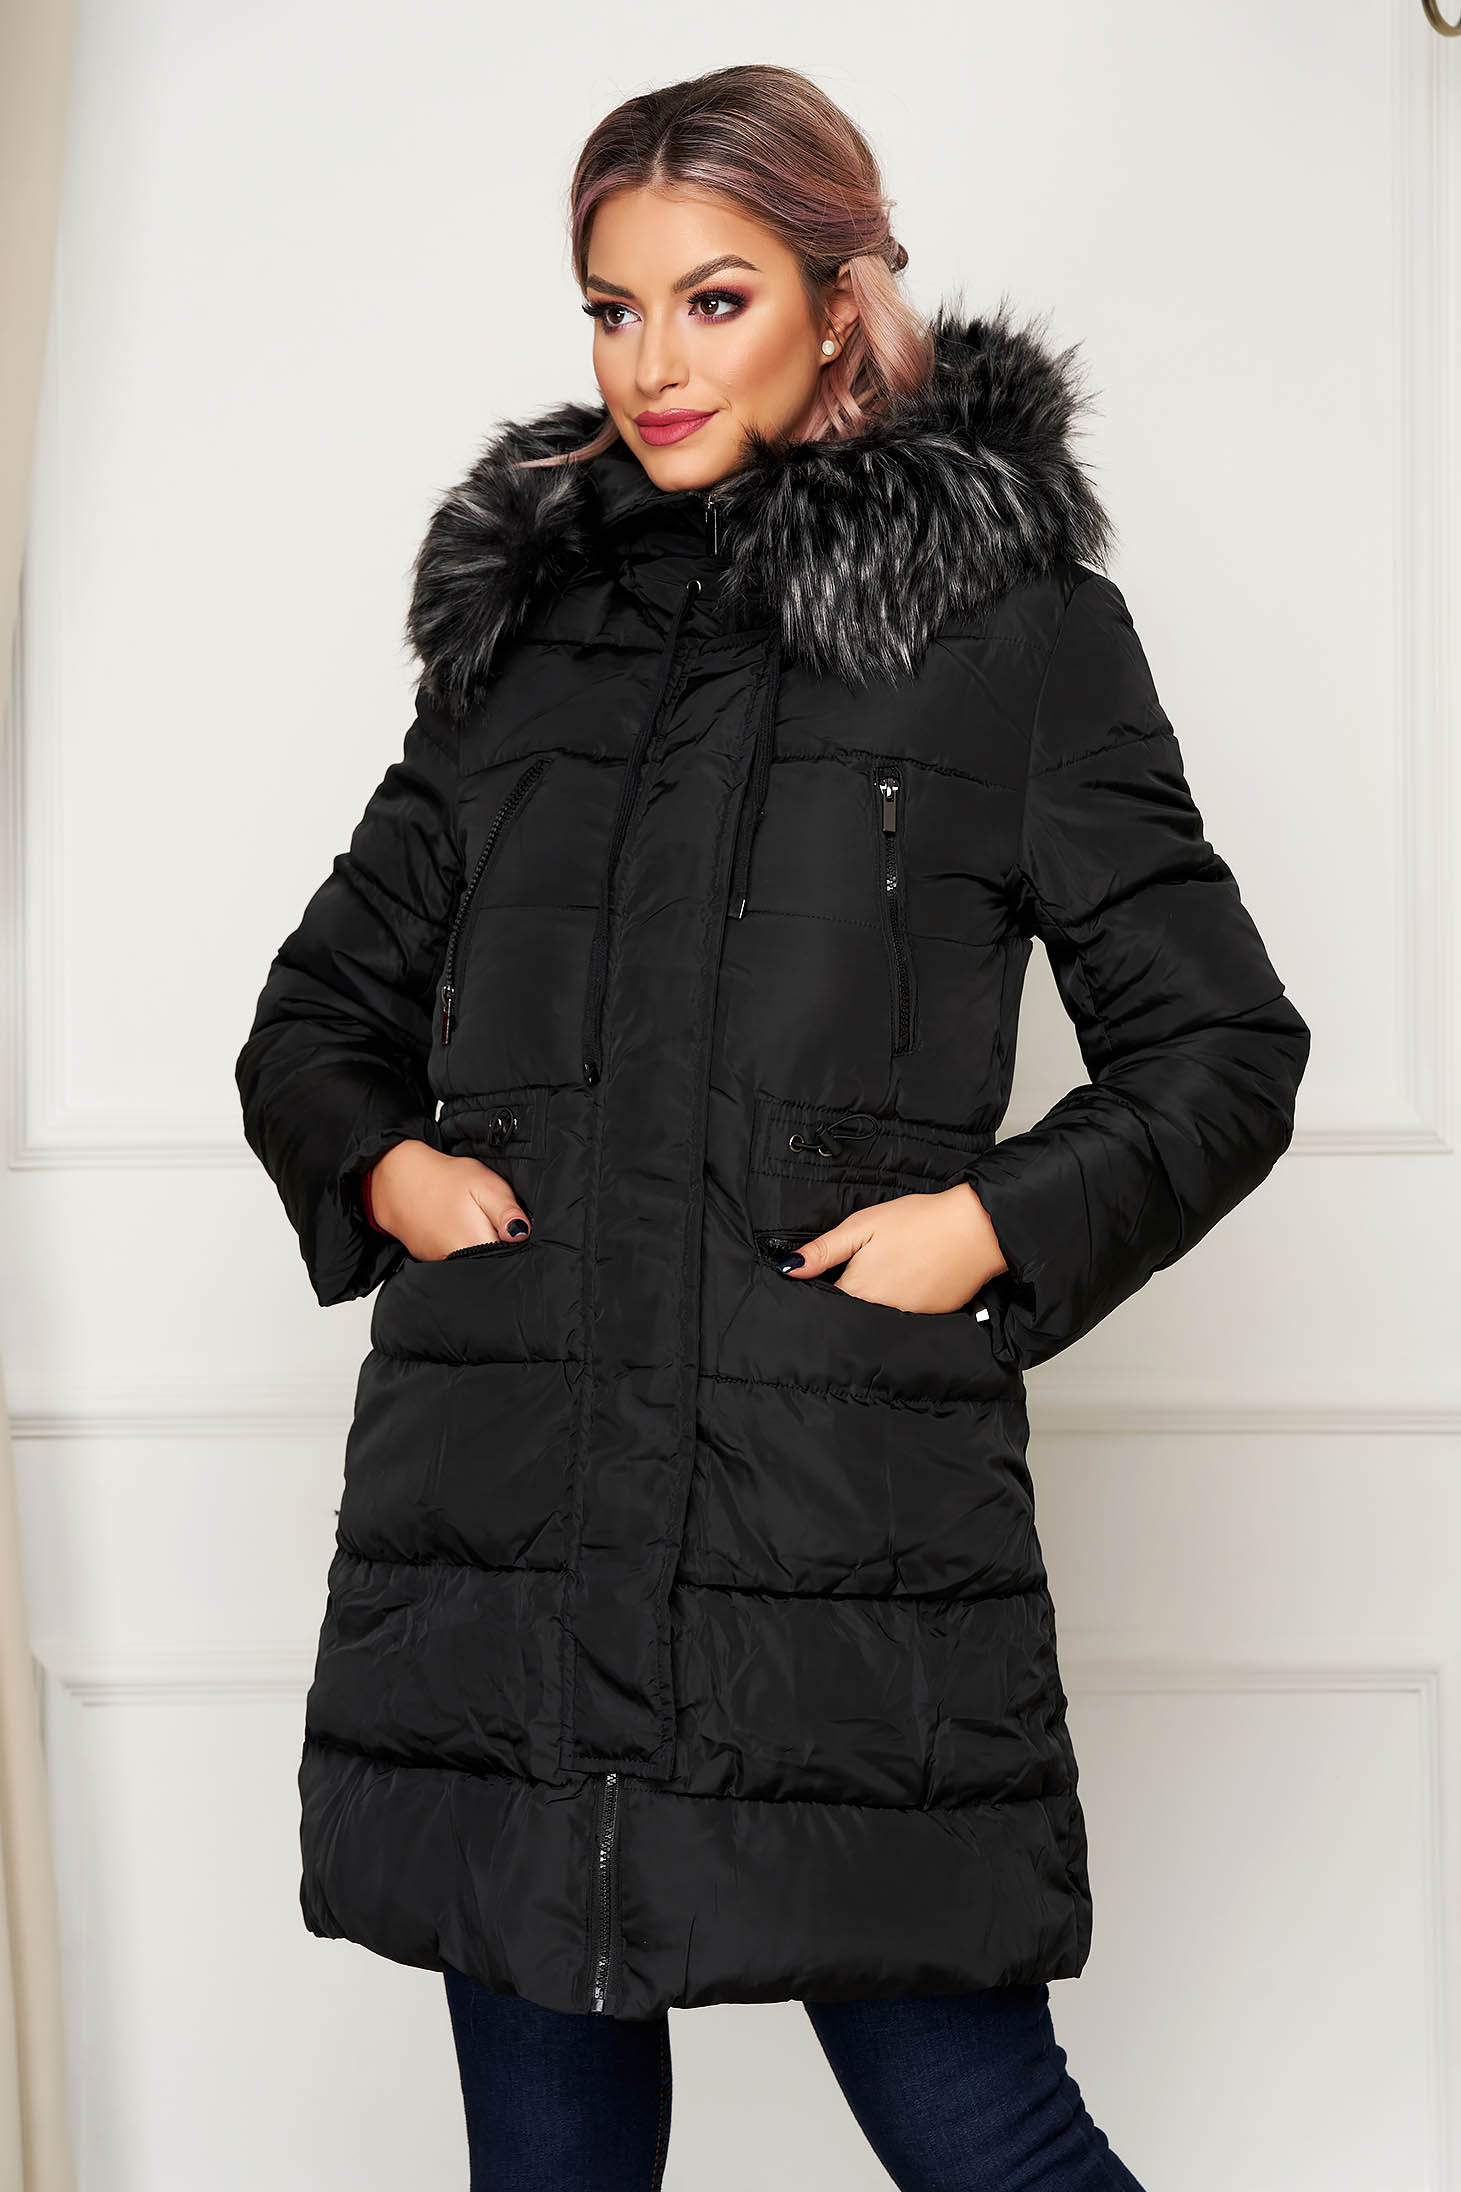 Black casual jacket from slicker with inside lining with pockets with faux fur accessory